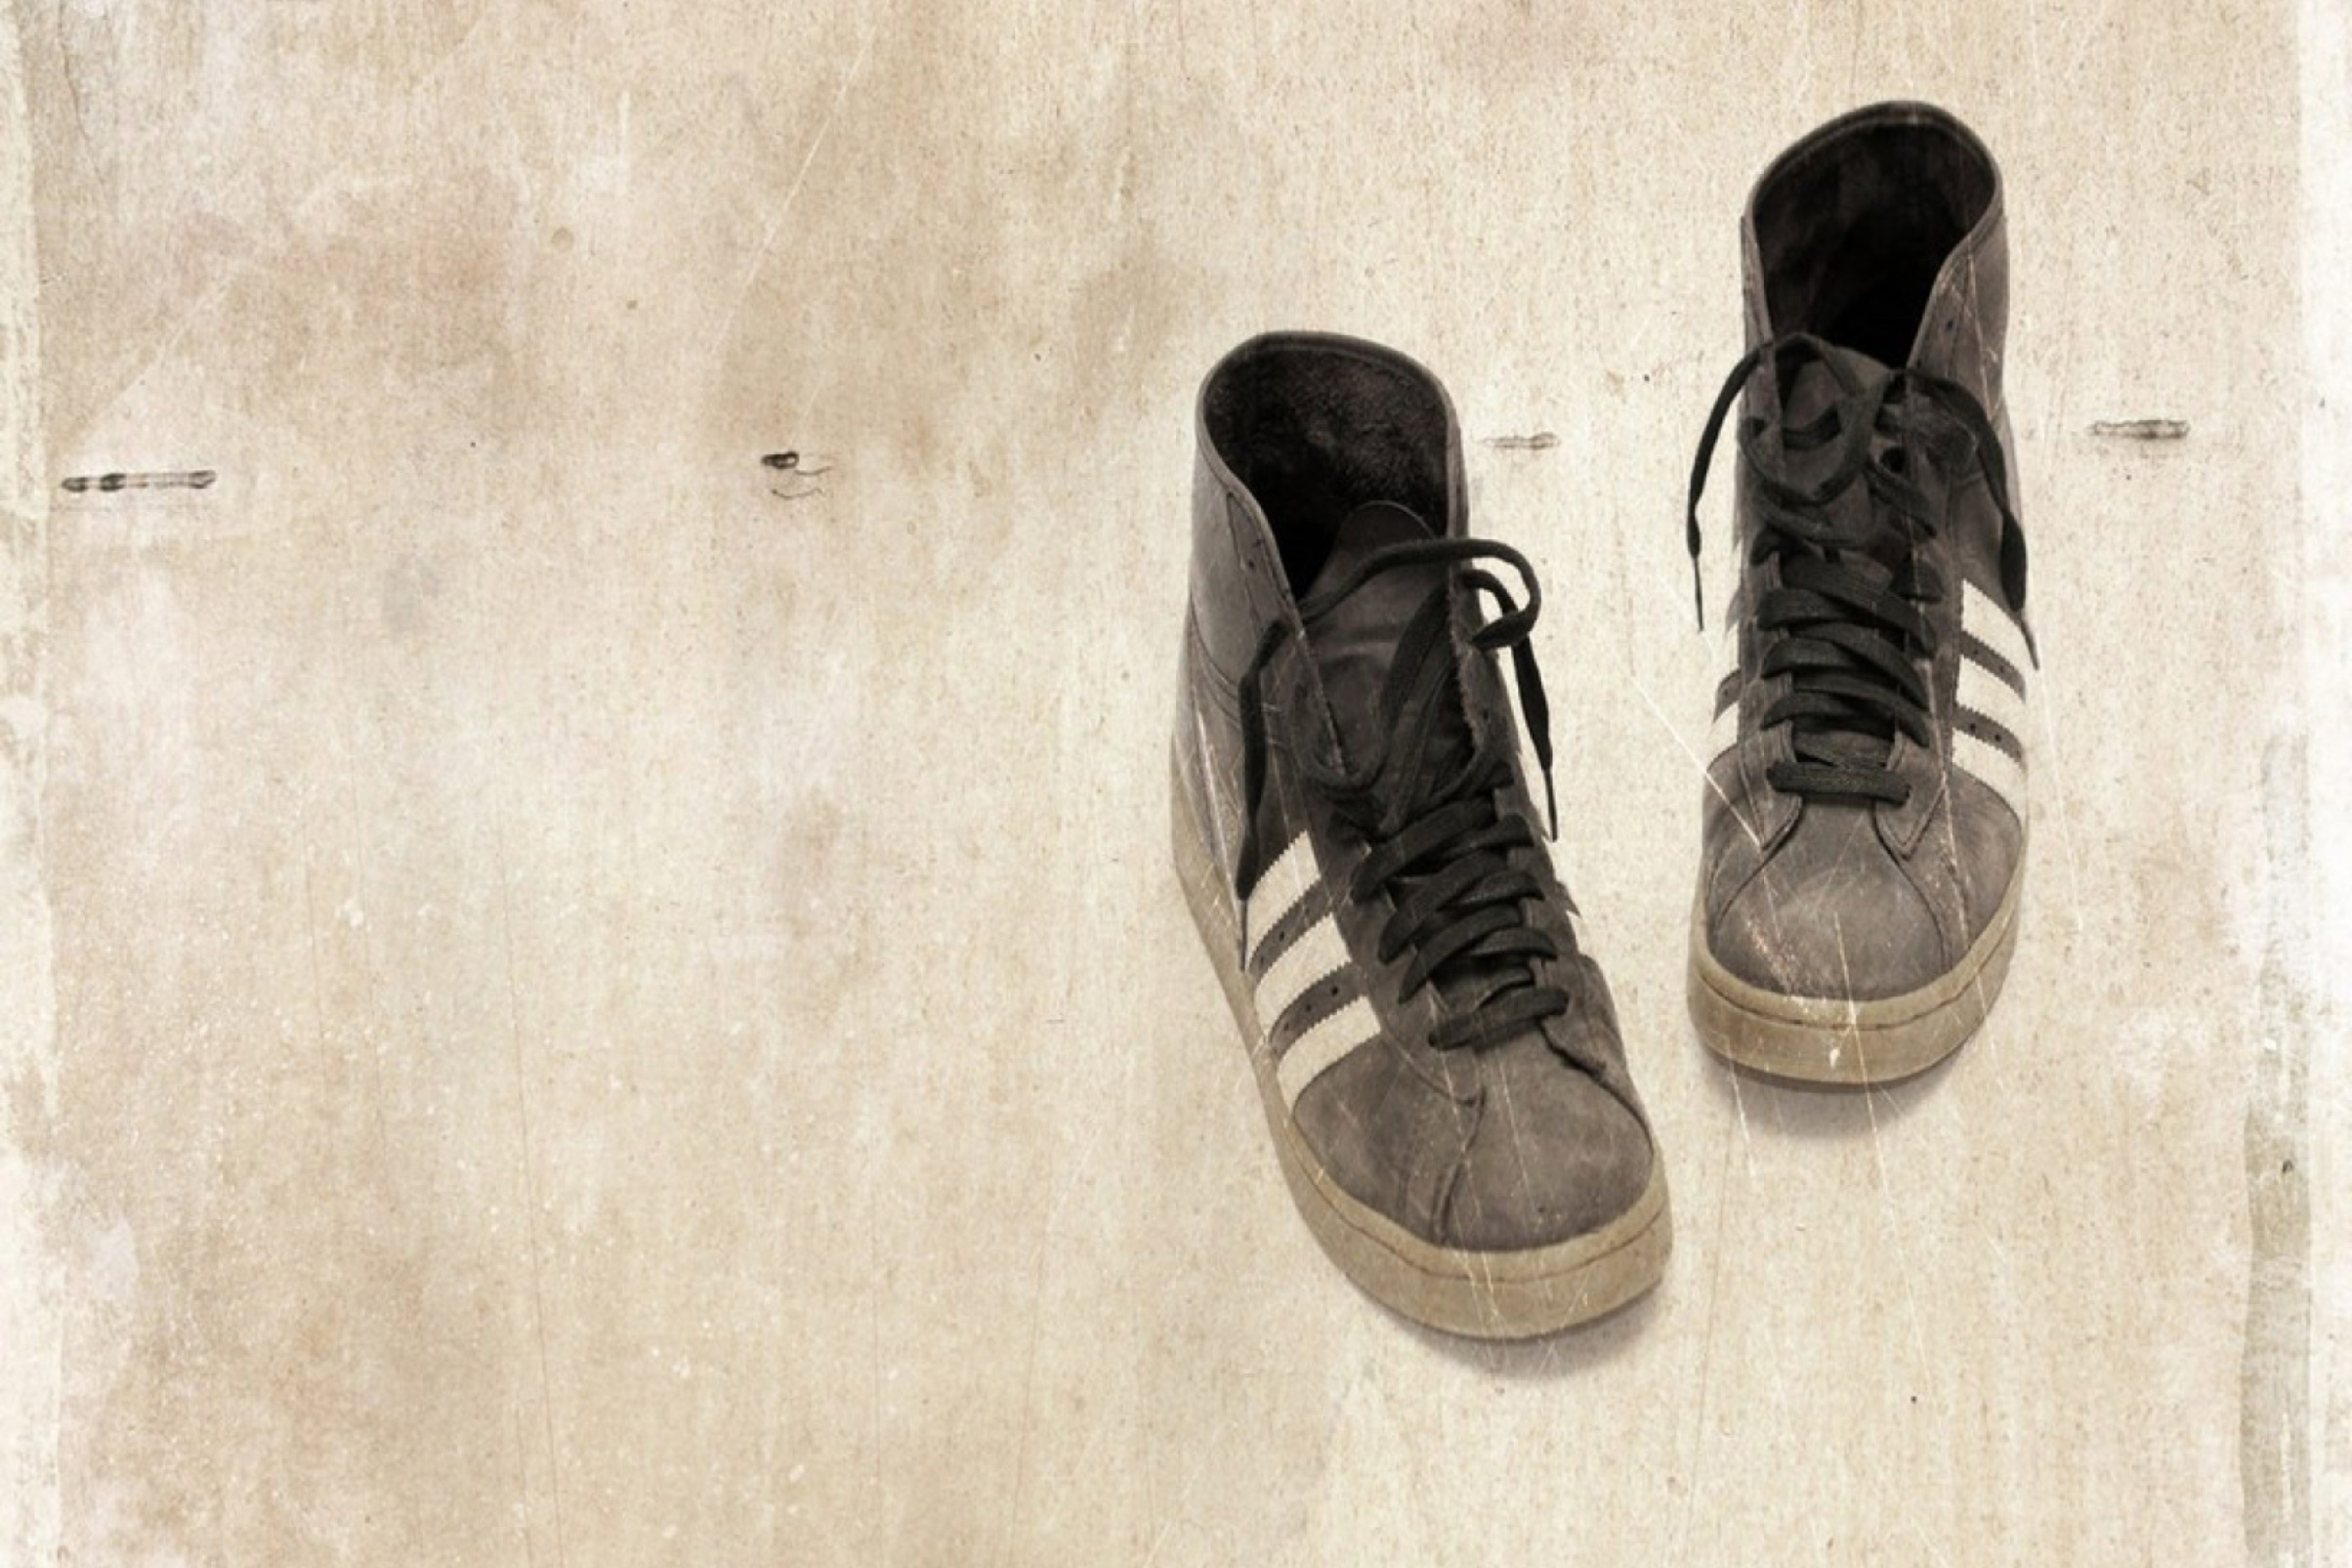 Grungy Sneakers wallpaper 2880x1920